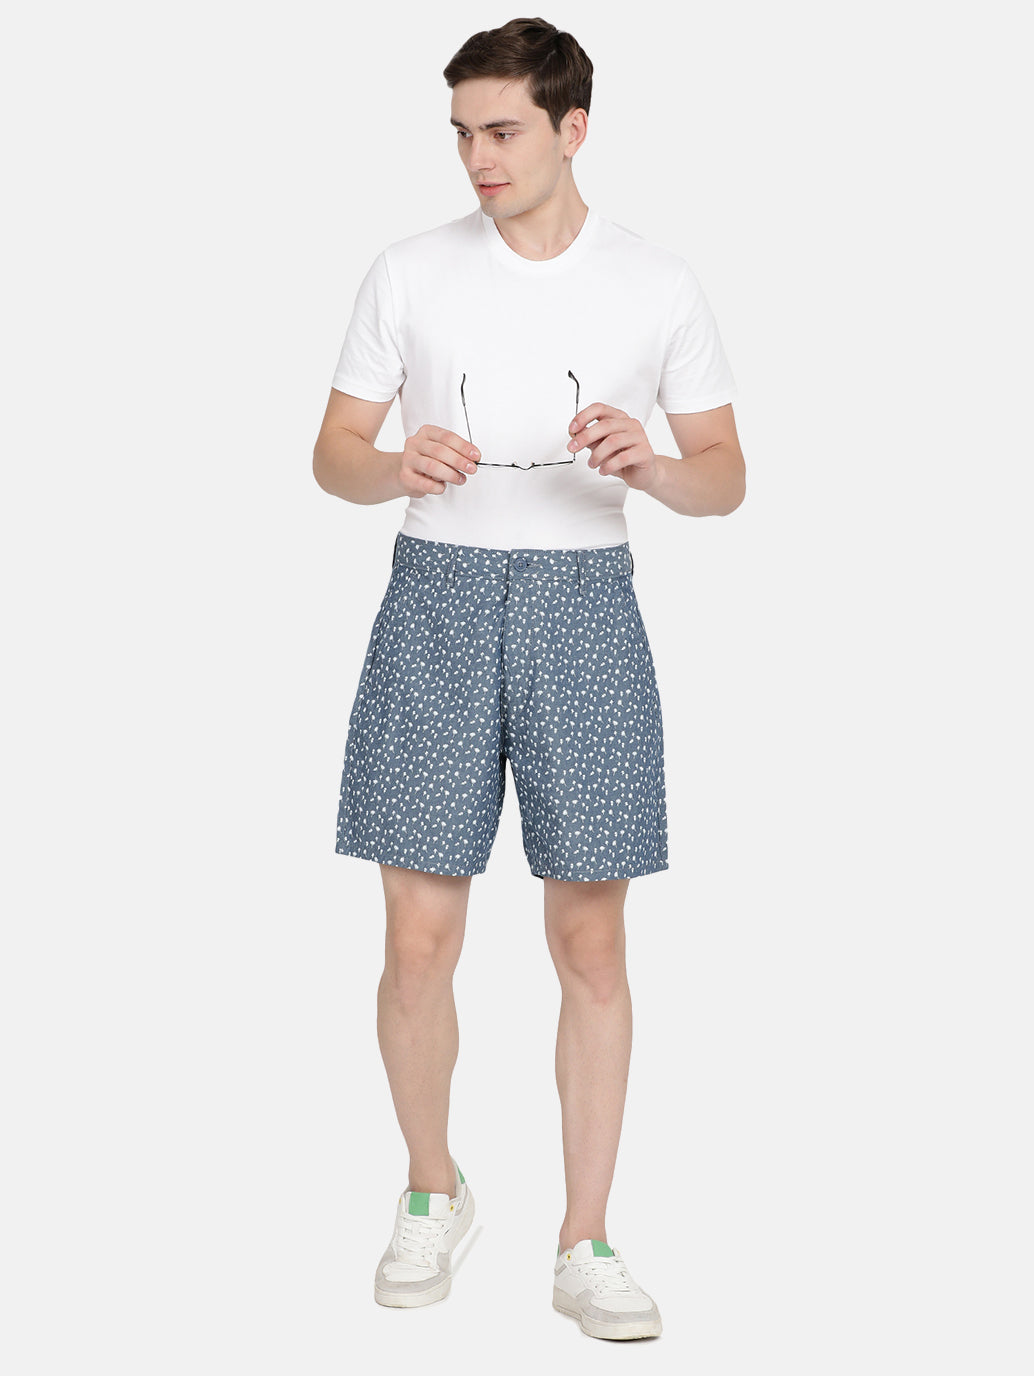 Levi's Men's Relaxed Fit Shorts